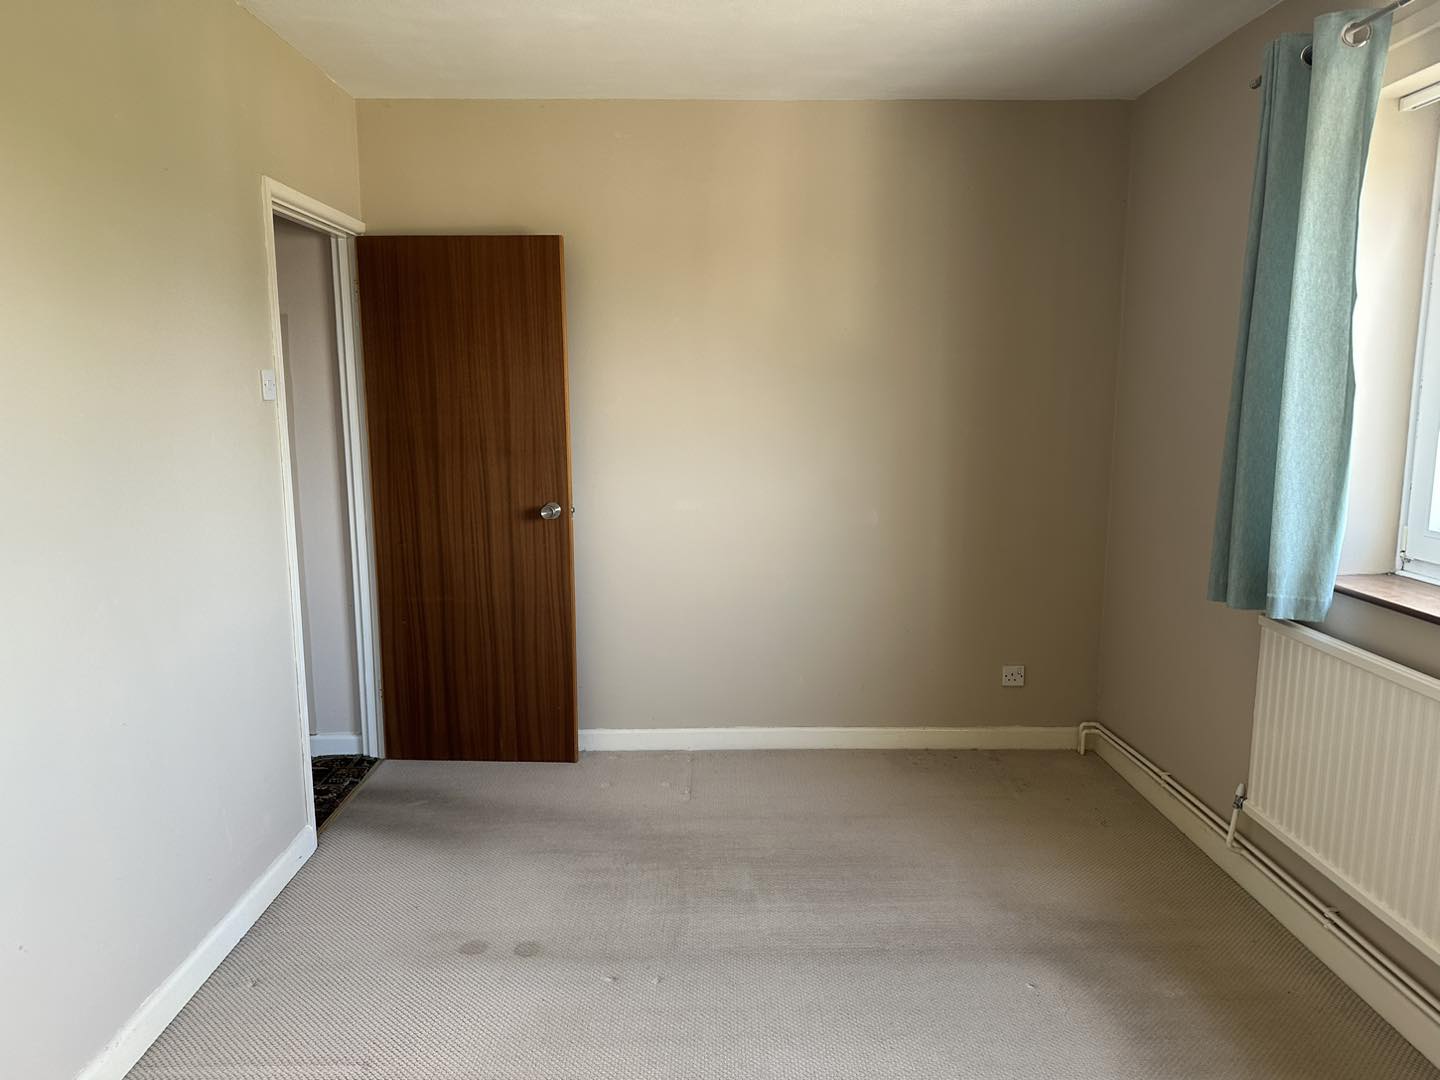 A photo of a clean empty bedroom in a house